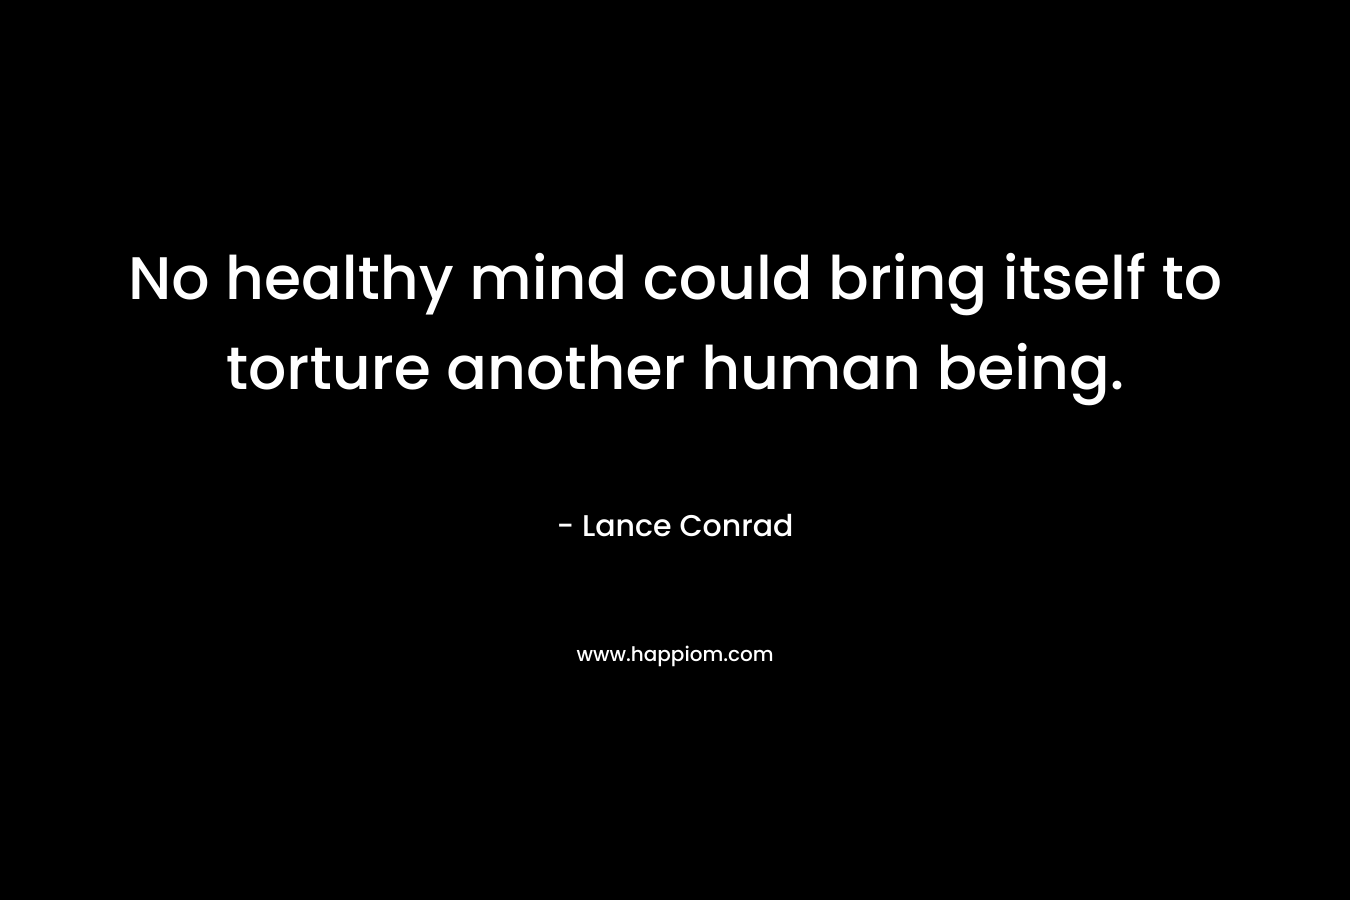 No healthy mind could bring itself to torture another human being.